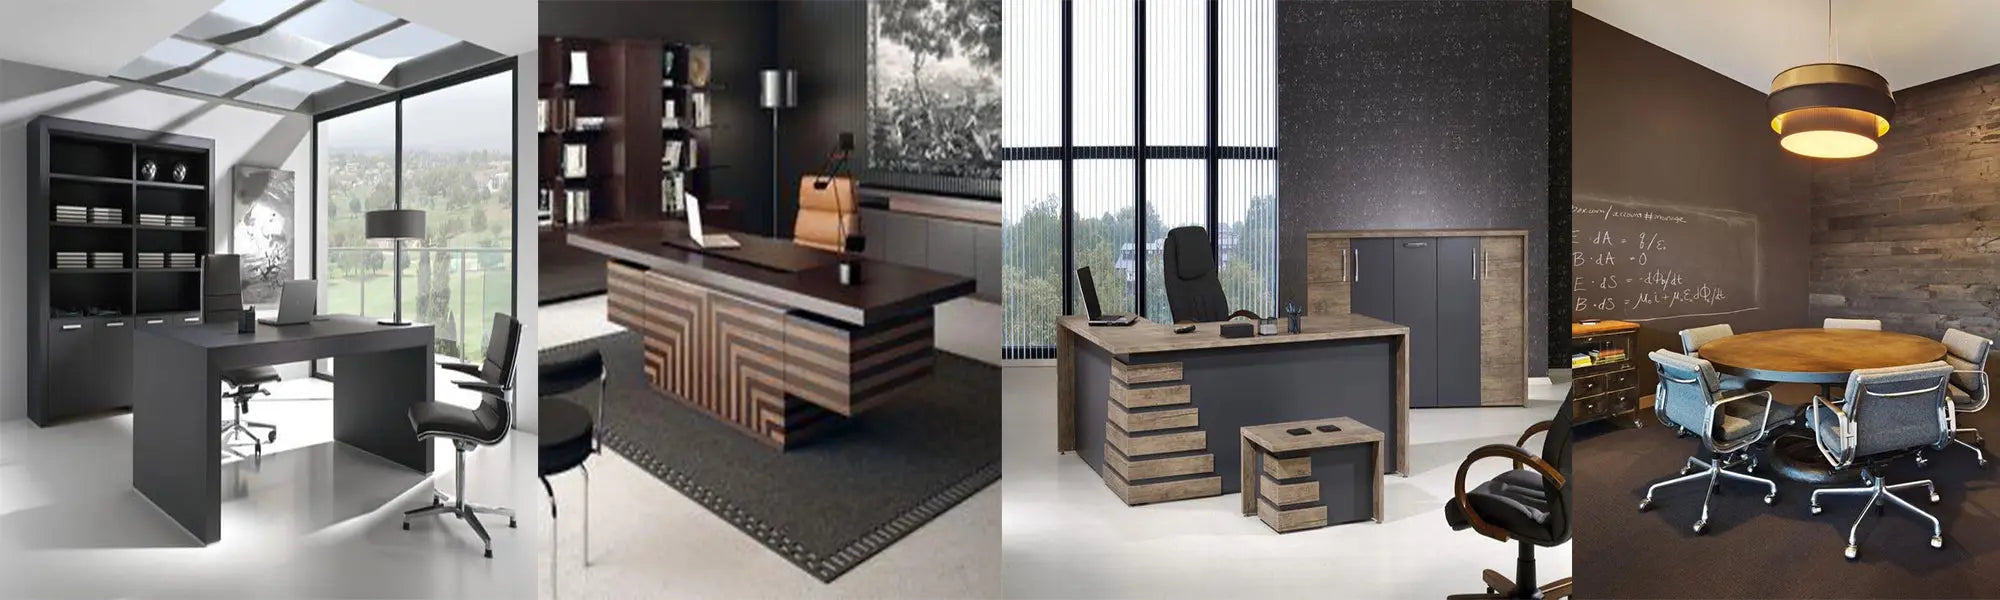 Contemporary Offices With Good  And Efficient Space Planning.